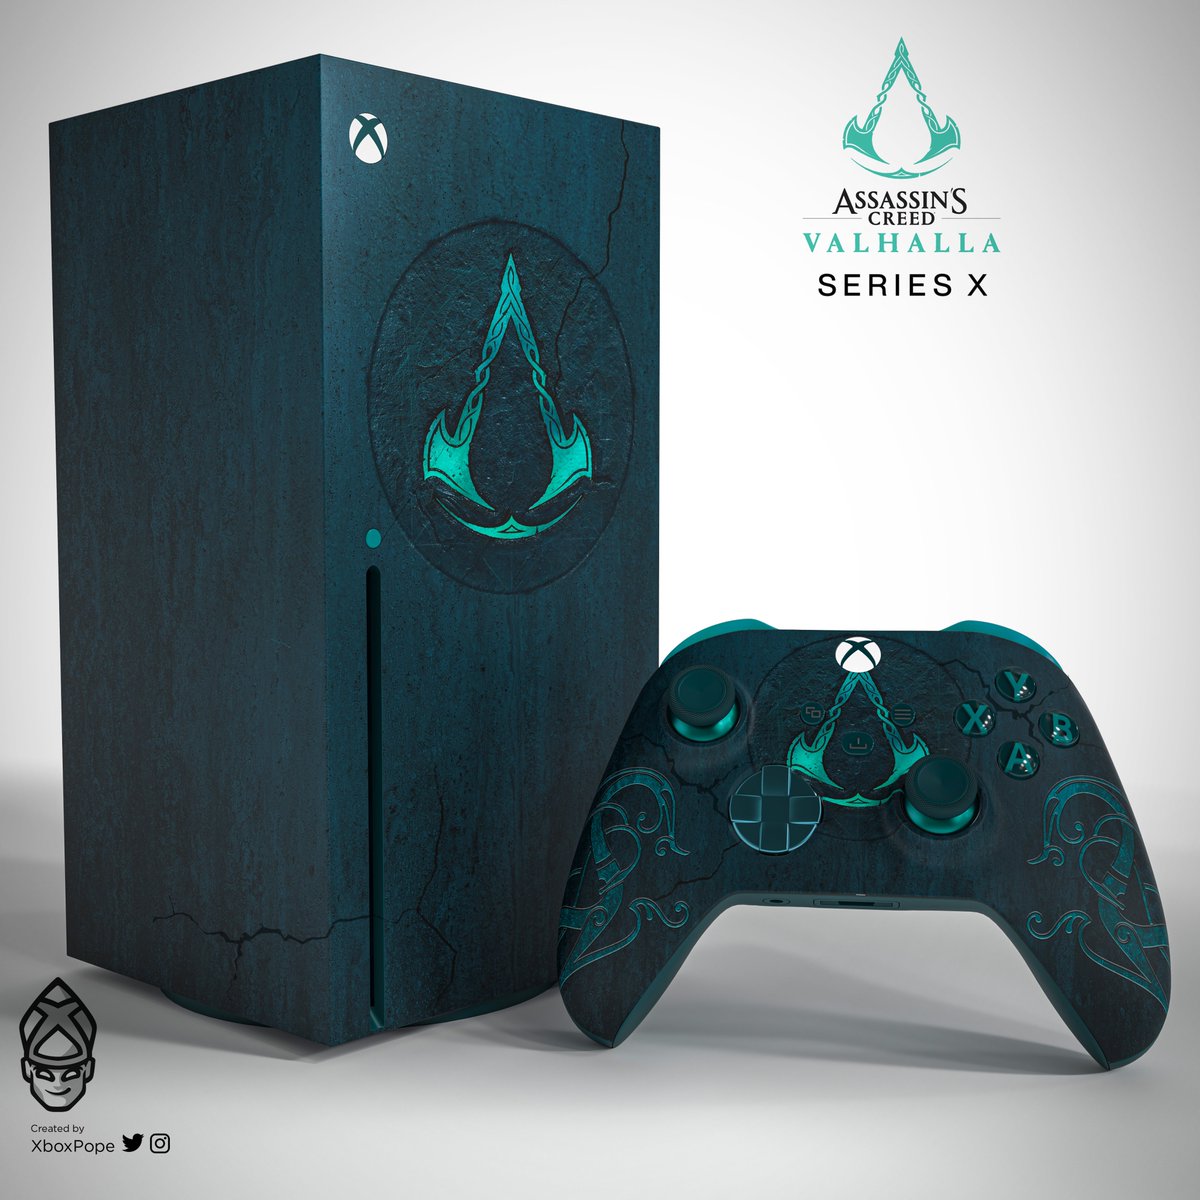 Assassin's Creed Valhalla Ultimate Edition Xbox Series X/S/One